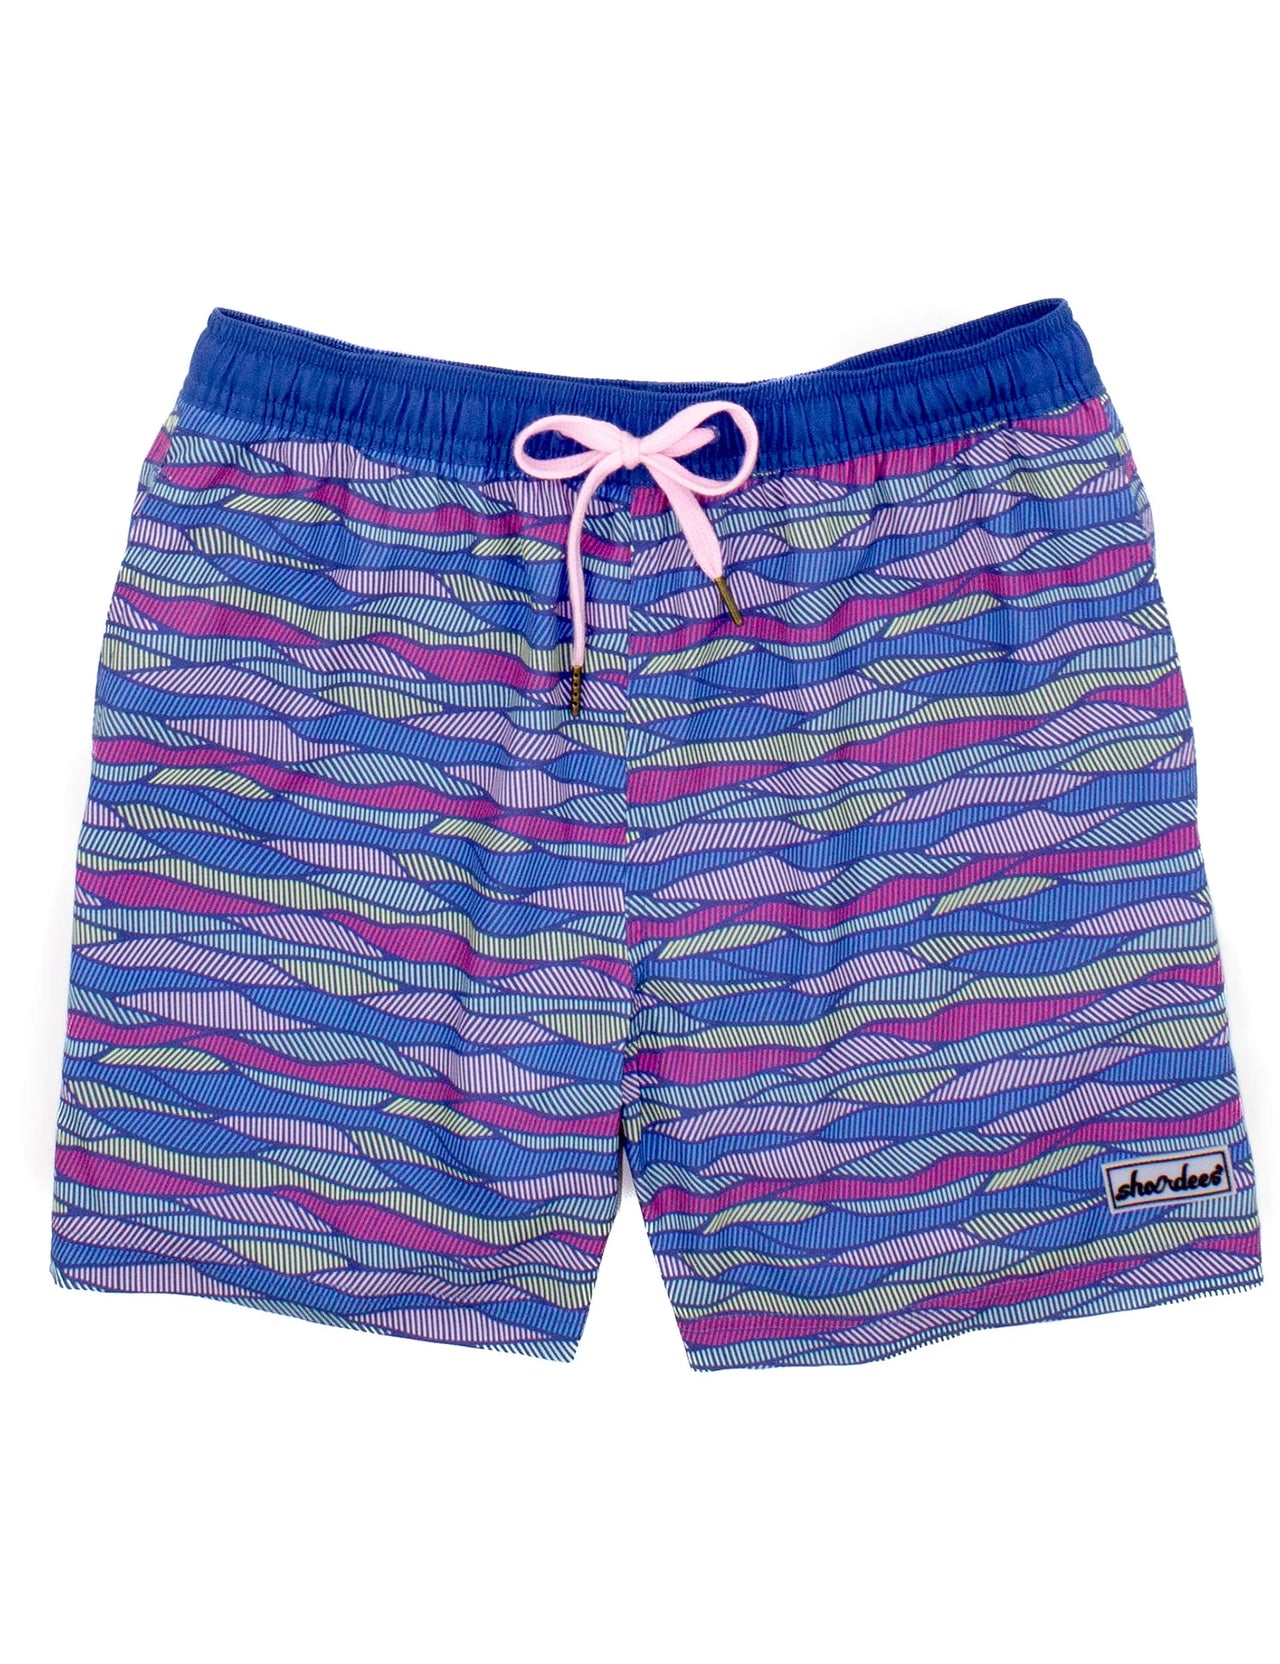 A pair of Properly Tied Men's Shordee Malibu Wave Swim Trunks laid out on a white surface. The swim trunks feature a vibrant wave pattern in shades of blue and teal, with an elastic waistband for a comfortable fit. The image also includes a matching straw hat in the background, available in adult sizes.